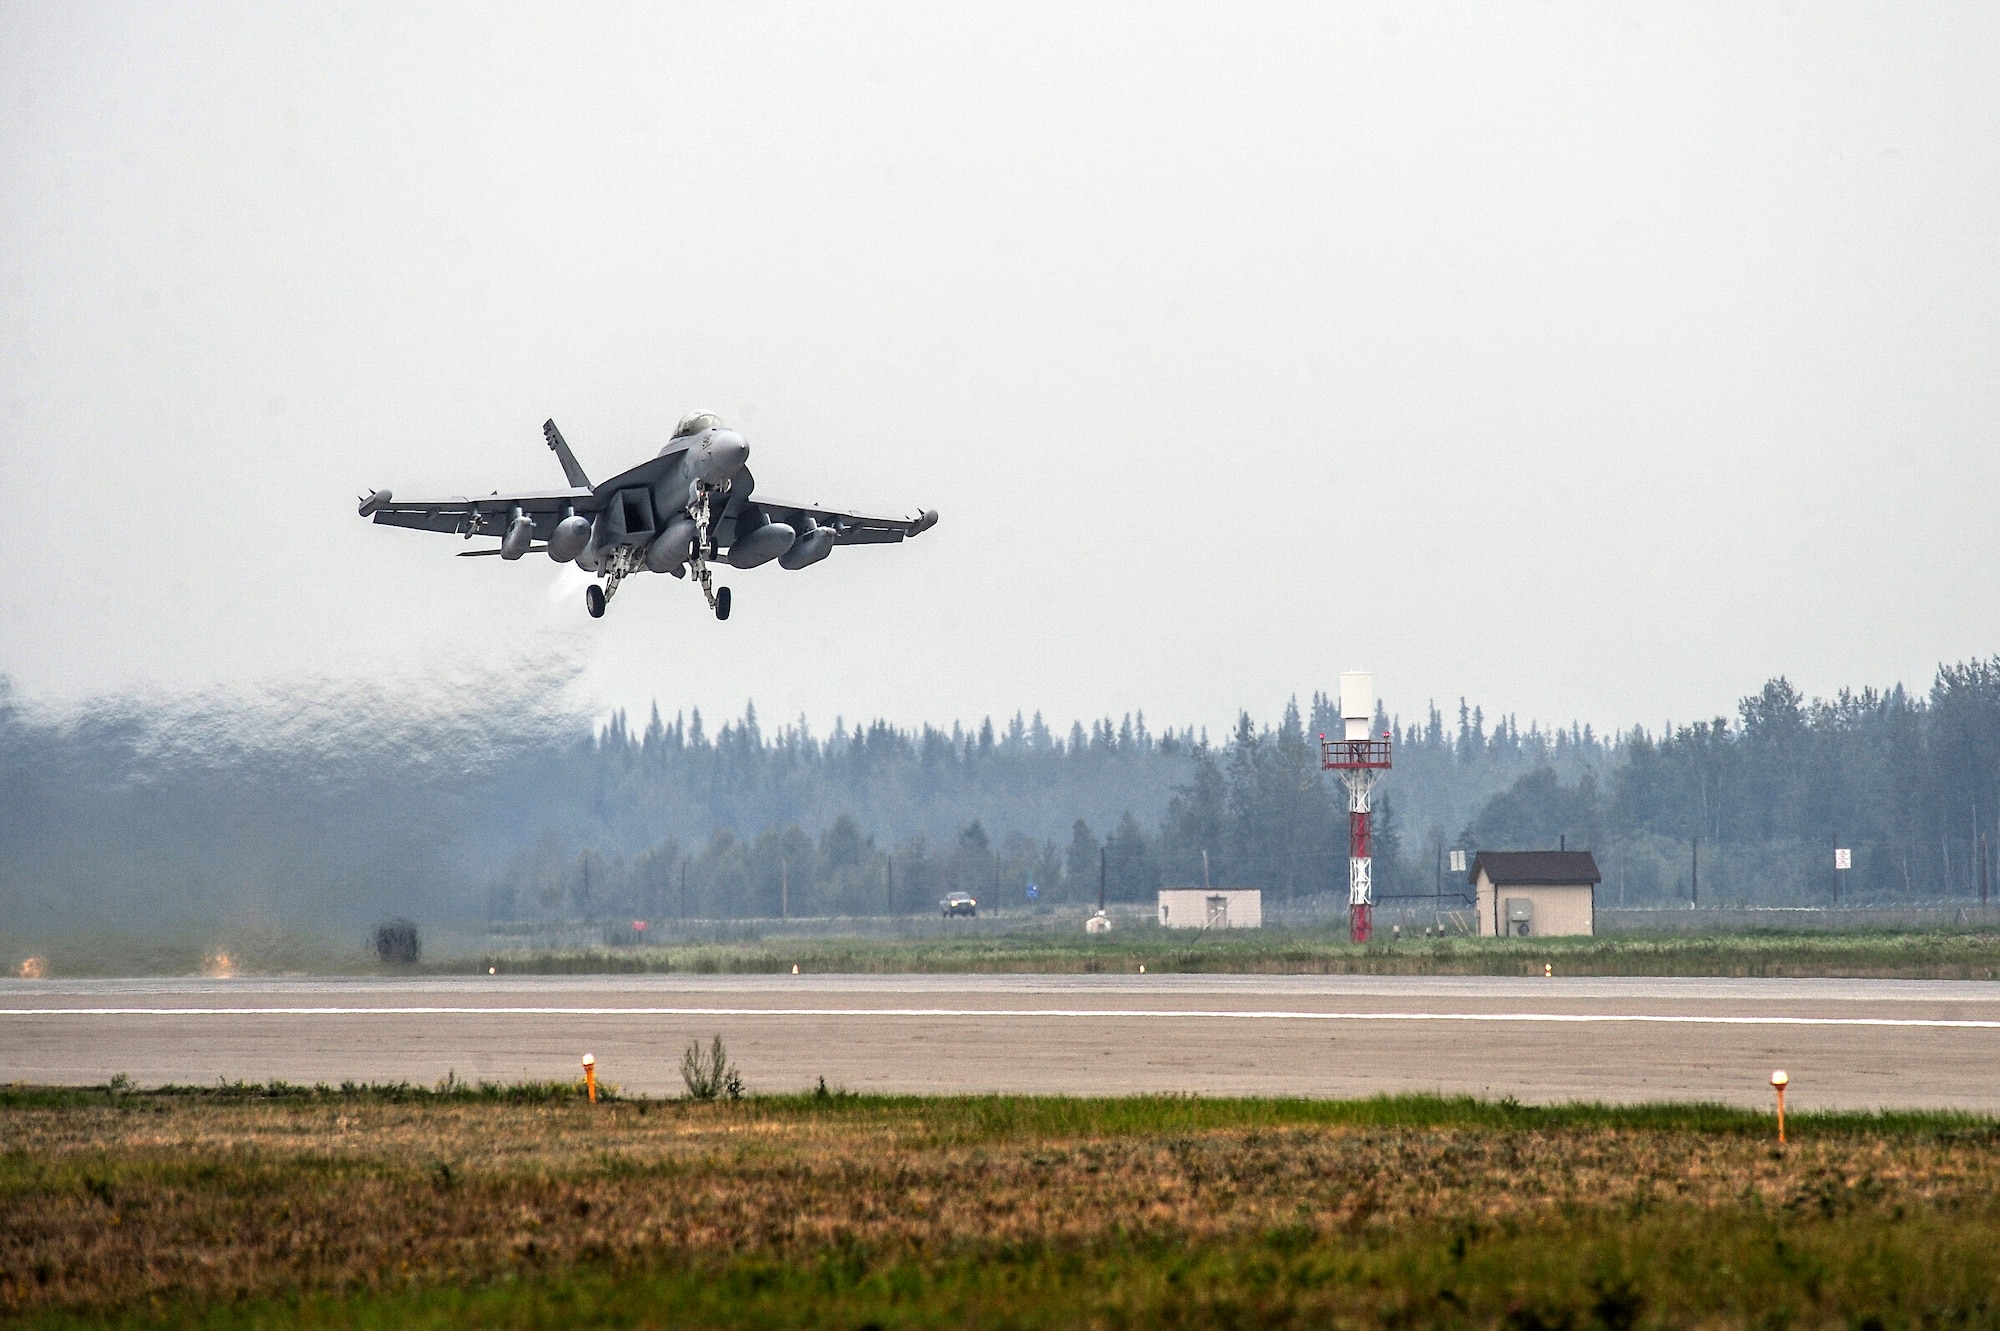 A United States Navy F/A-18 Hornet from the 113th Fighter Squadron, Naval Air Station Lemoore, Calif., takes off for a familiarization flight Aug. 9, 2013, Eielson Air Force Base, Alaska. The F/A-18 is a twin-engine supersonic multirole fighter jet designed for air-to-air and air-to-ground combat. (U.S. Air Force photo by Senior Airman Zachary Perras/Released)